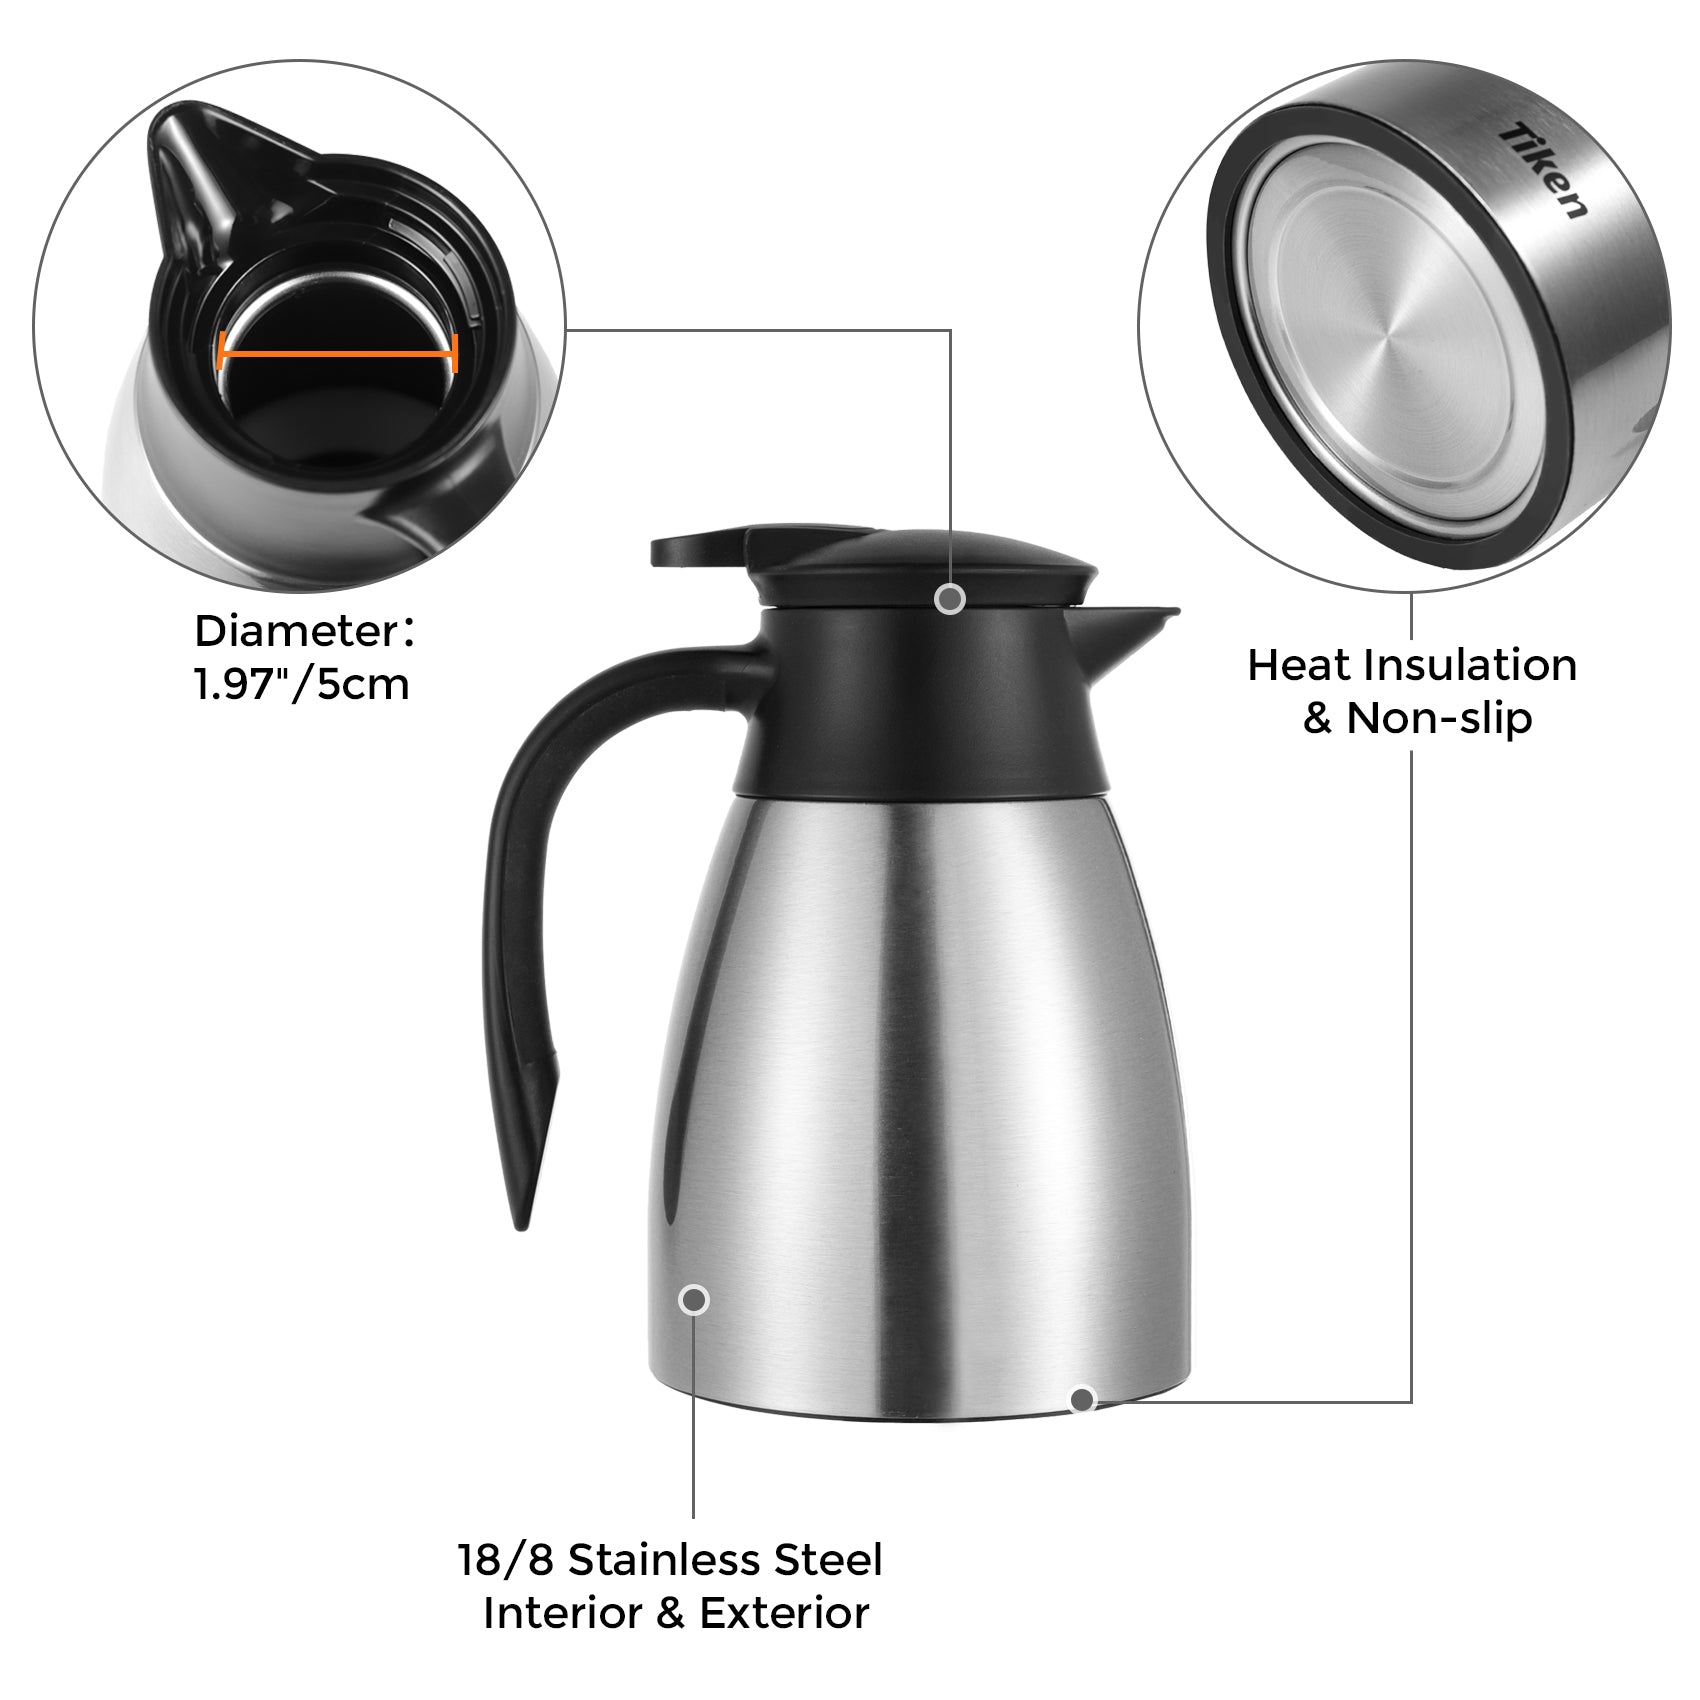 Thermos 34-Ounce Vacuum Insulated Stainless Steel Carafe